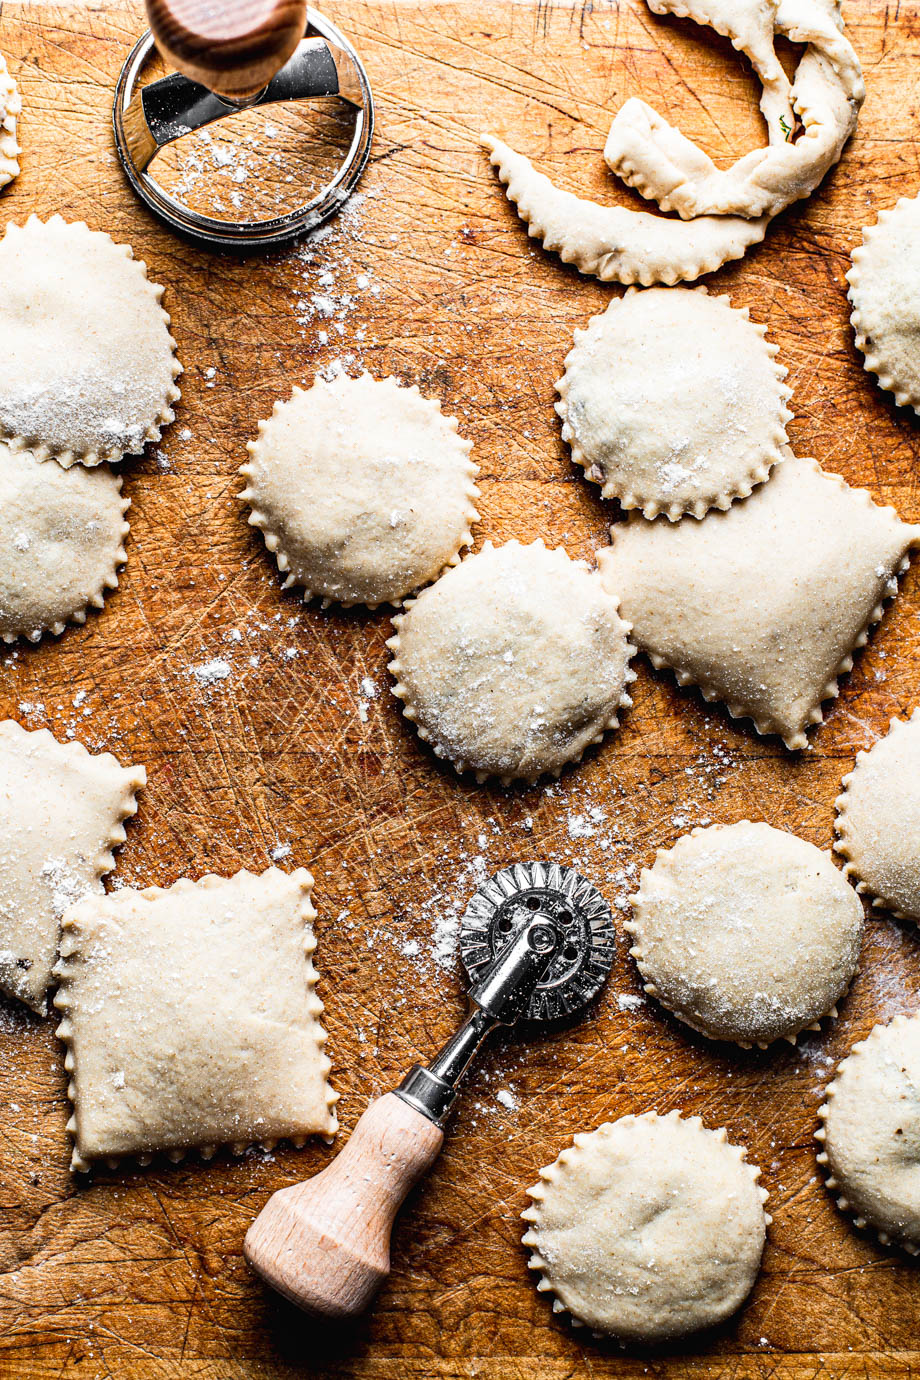 homemade ravioli on a wooden cutting board photography